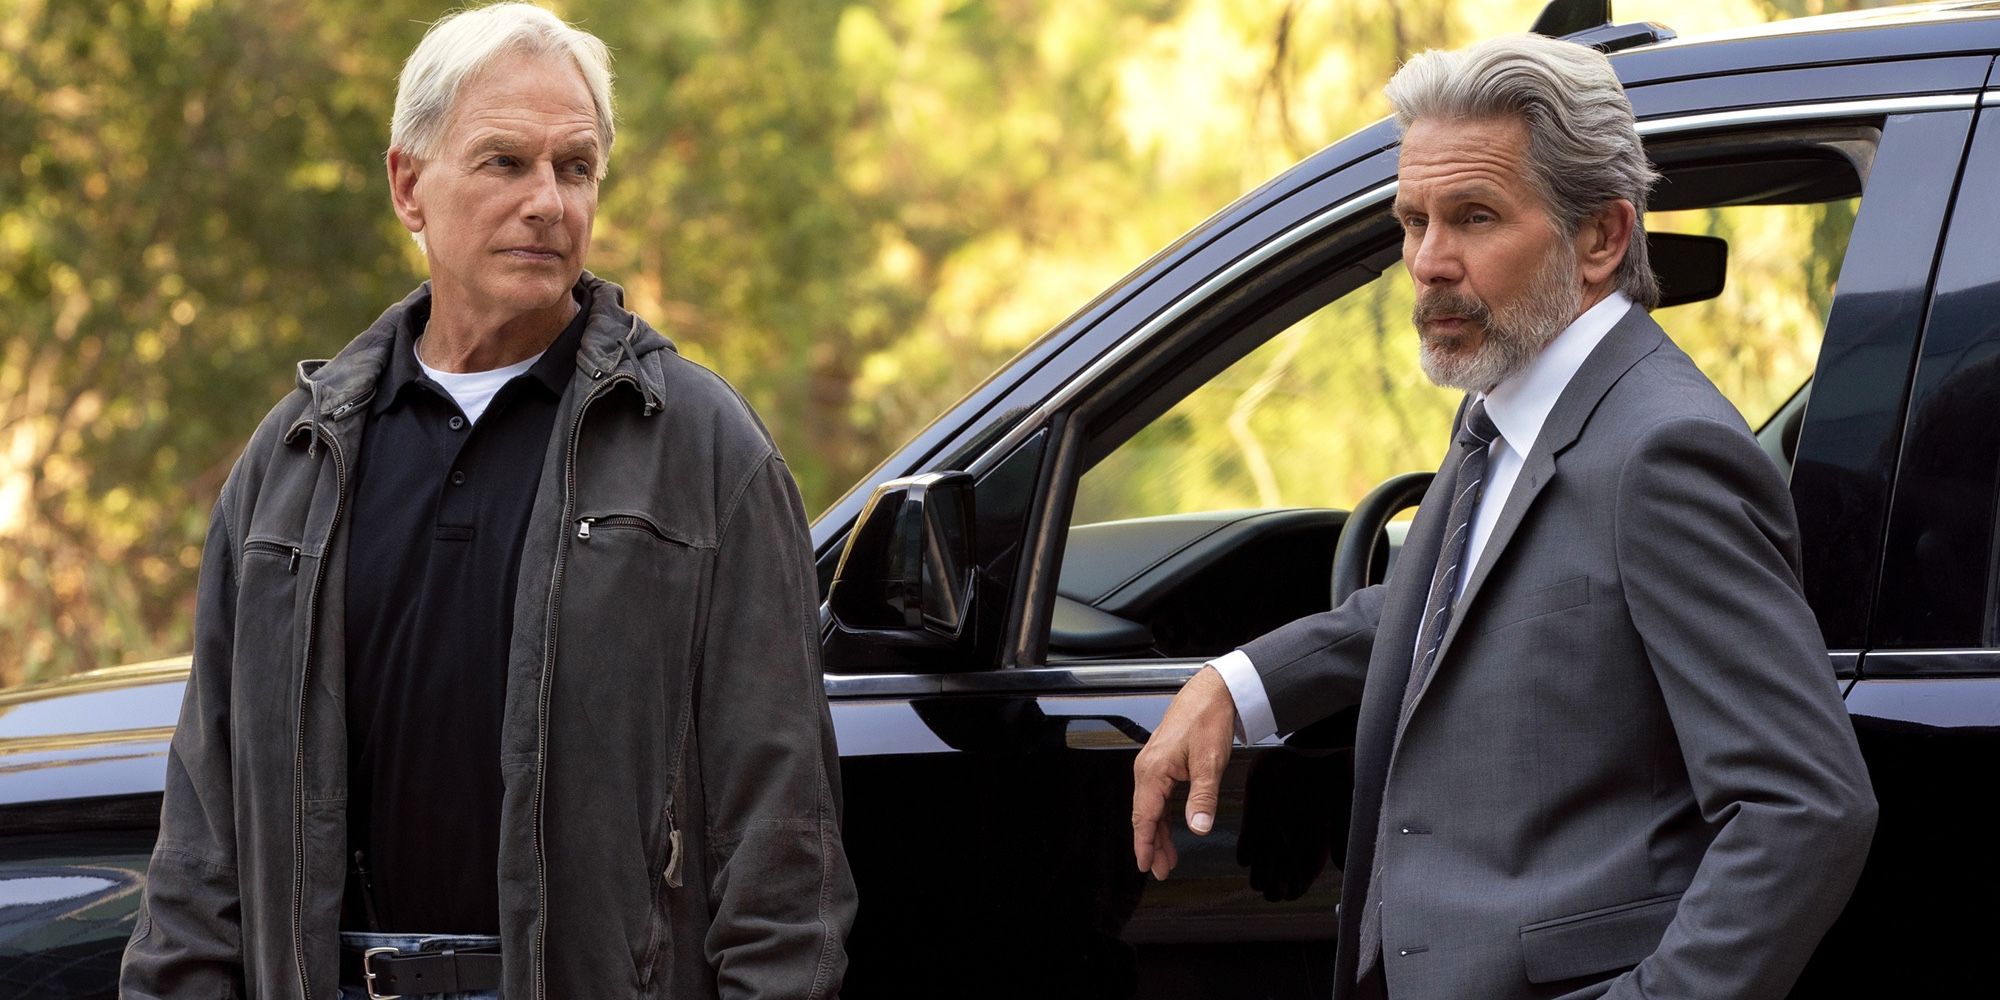 Mark Harmon and Gary Cole next to a black vehicle on NCIS